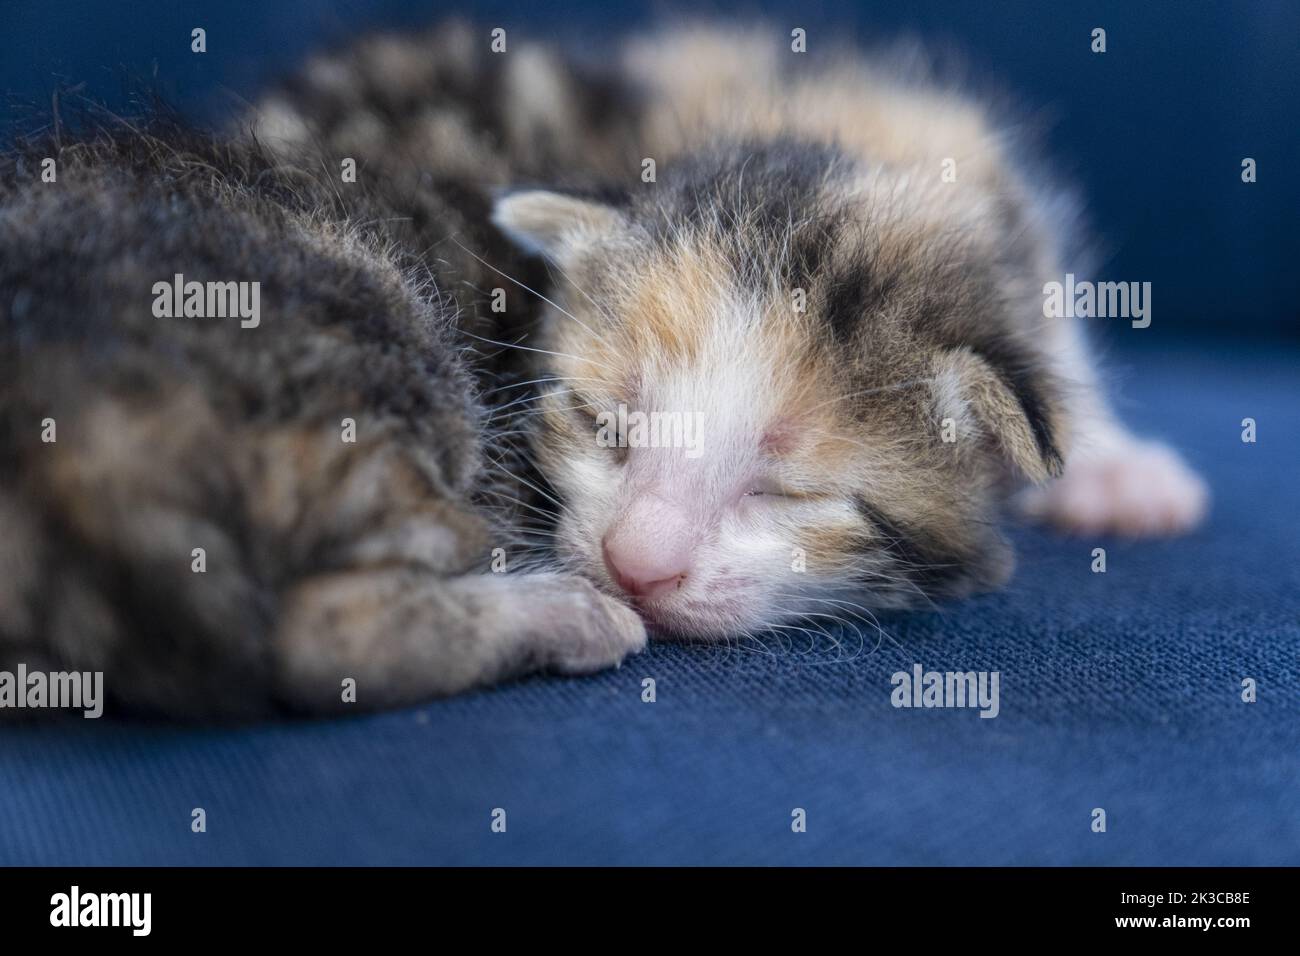 Newborn calico tabby cats sleeping together, adorable newborn baby cat, kitten concept, half-open eye small cat, detailed sitting view Stock Photo